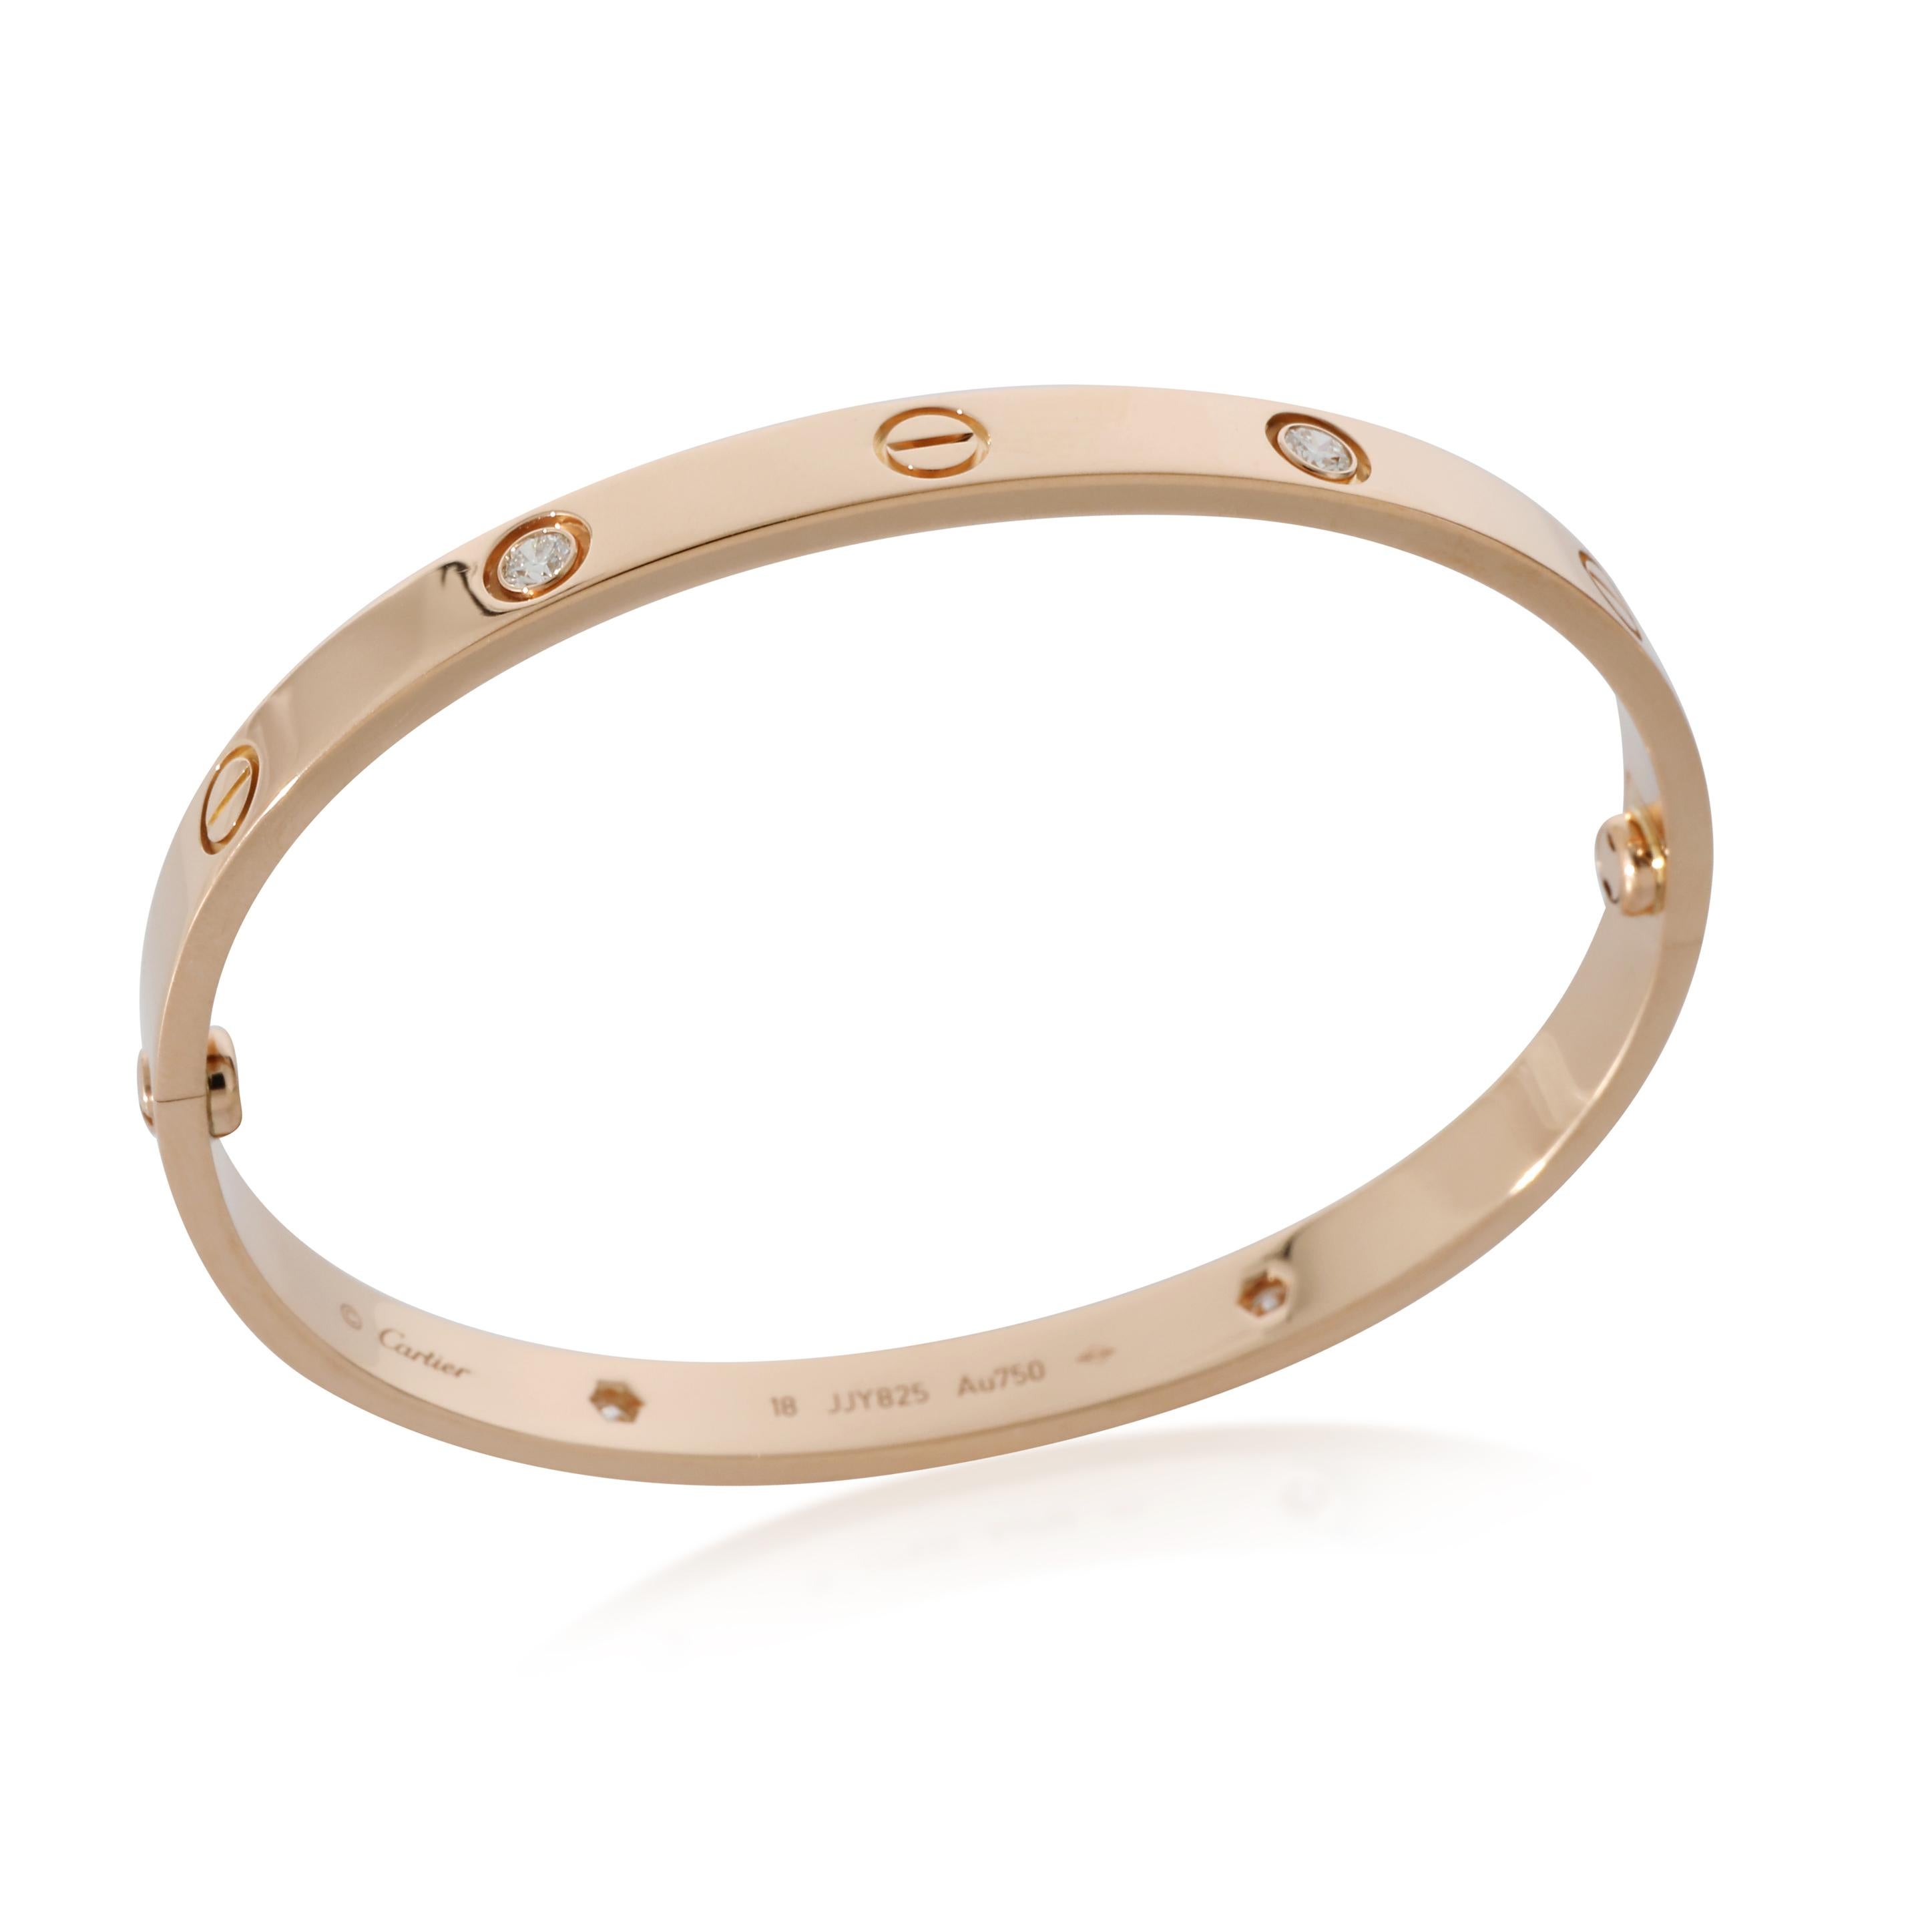 Cartier 4 Diamond Love Bracelet in 18K Rose Gold 0.42 CTW

PRIMARY DETAILS
SKU: 133776
Listing Title: Cartier 4 Diamond Love Bracelet in 18K Rose Gold 0.42 CTW
Condition Description: Cartier's Love collection is the epitome of iconic, from the